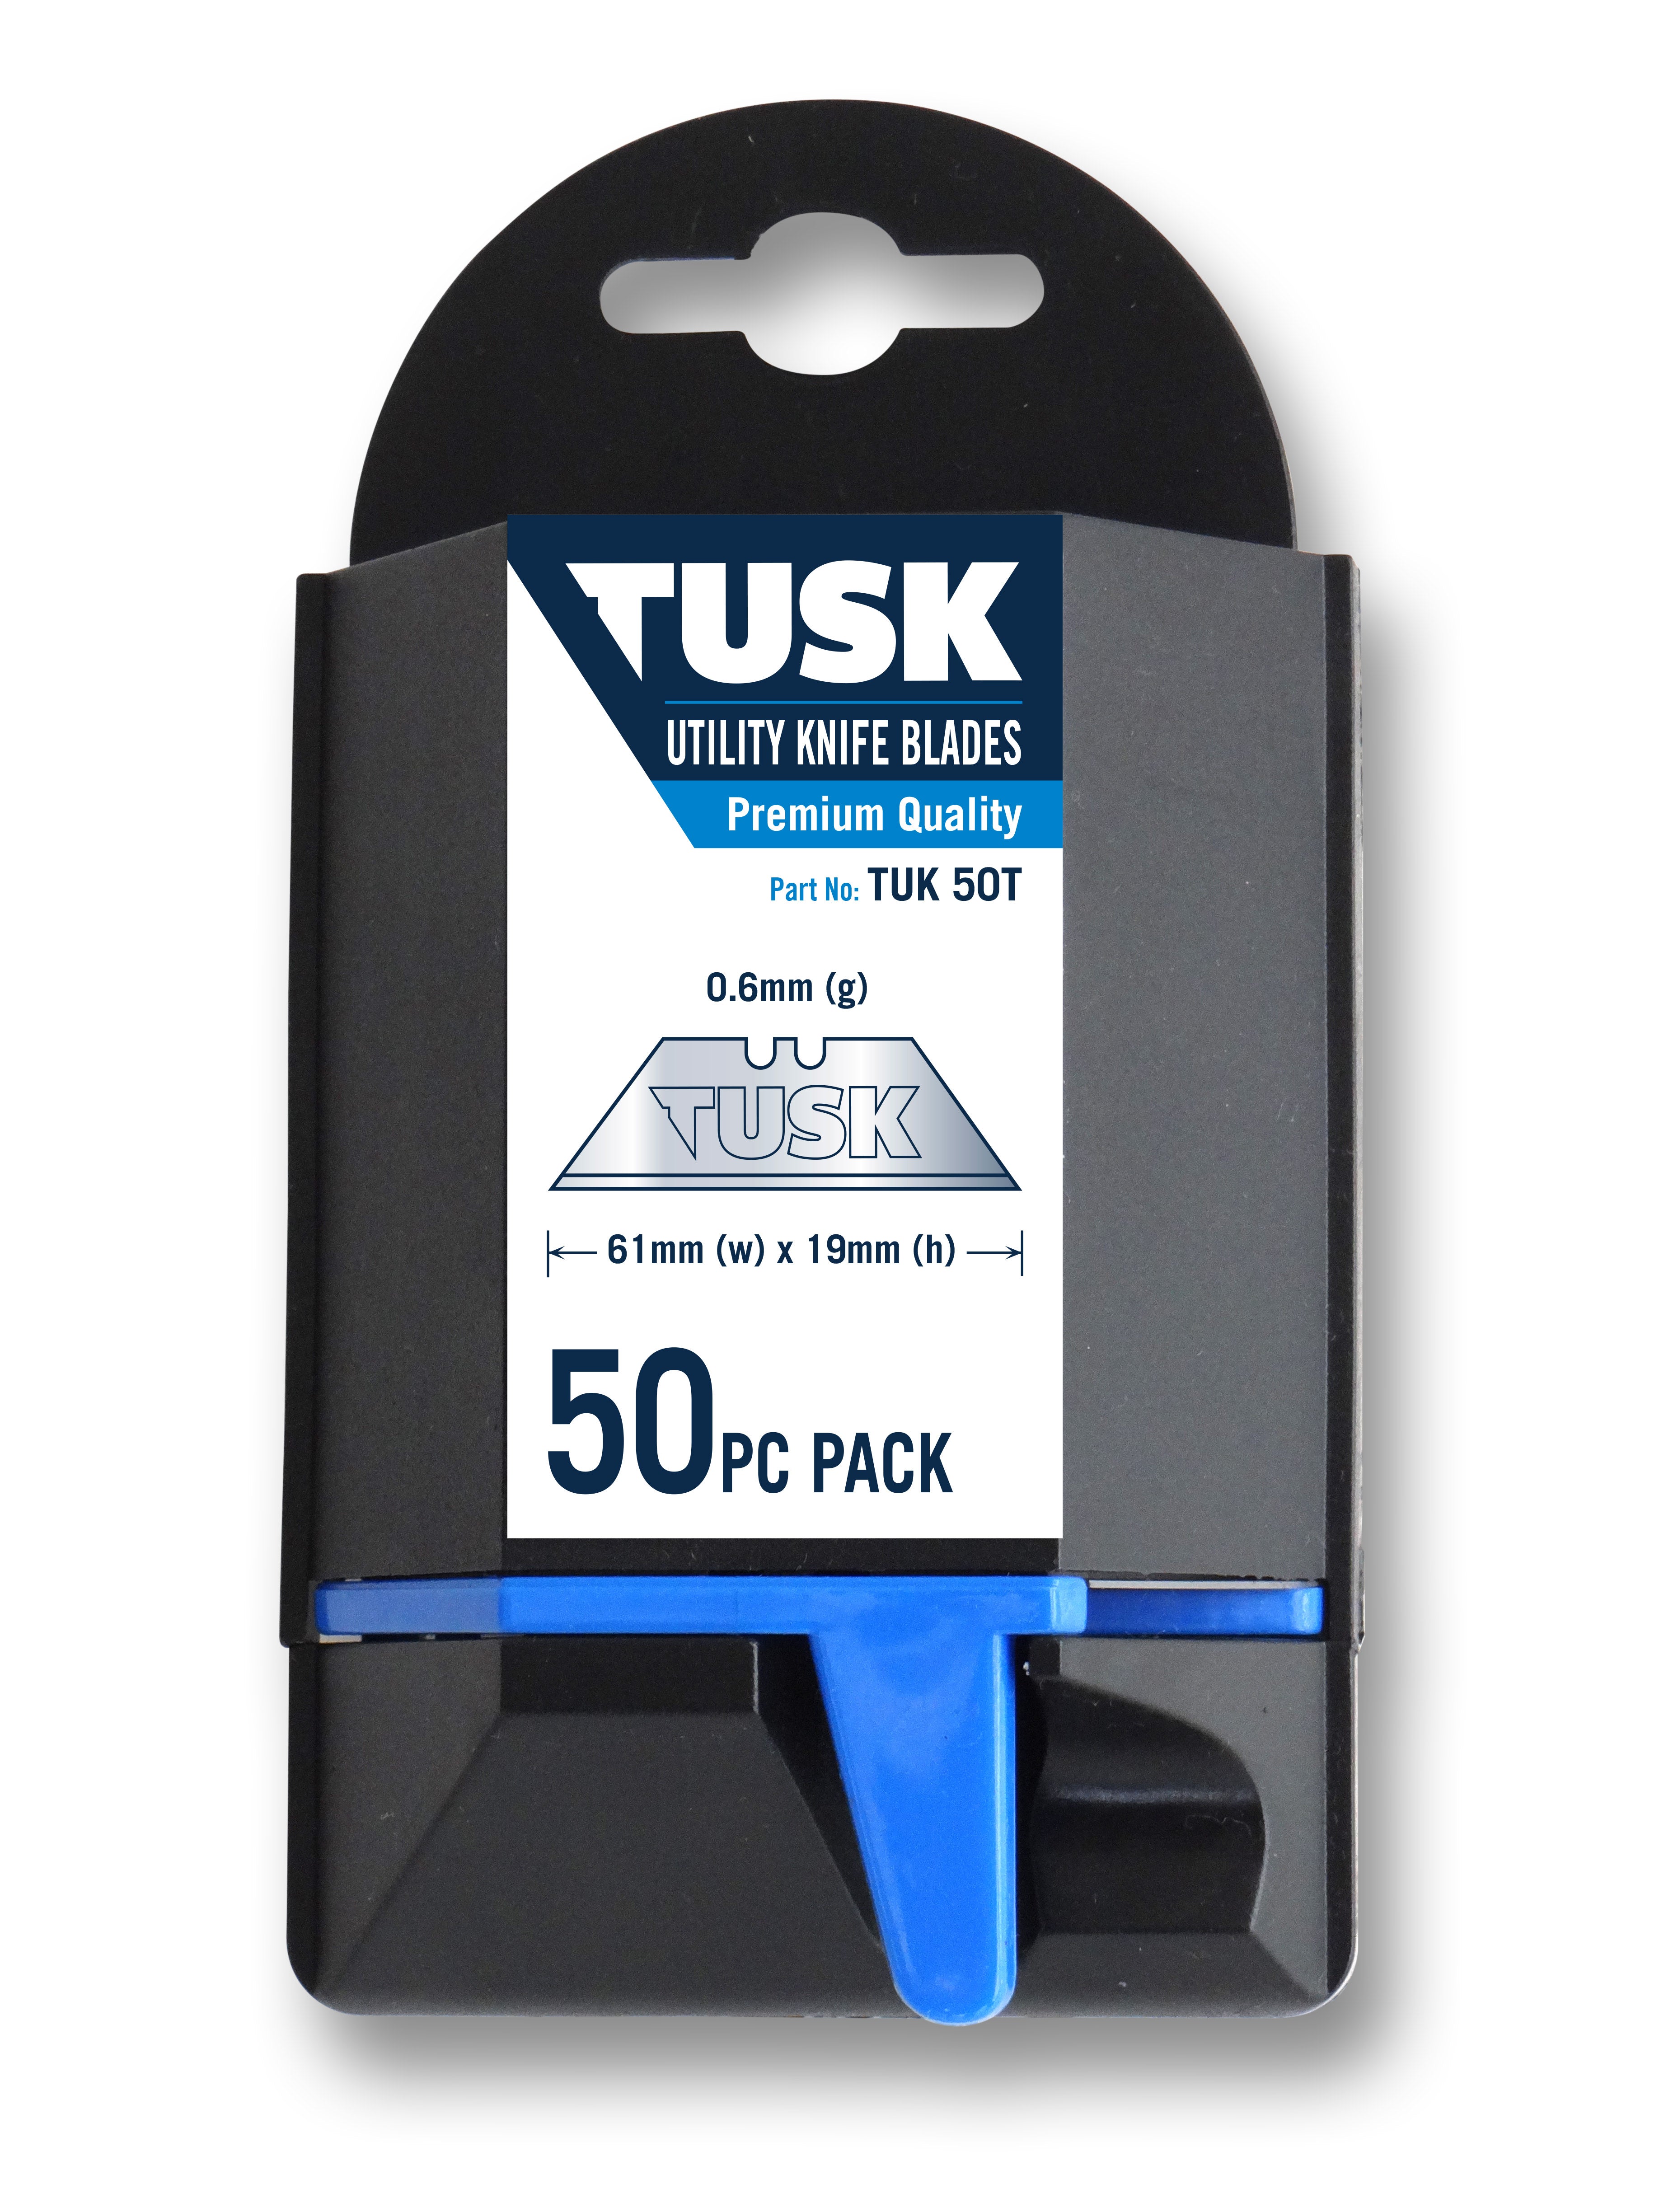 Tusk Utility Knife Blades 50Pc Pack